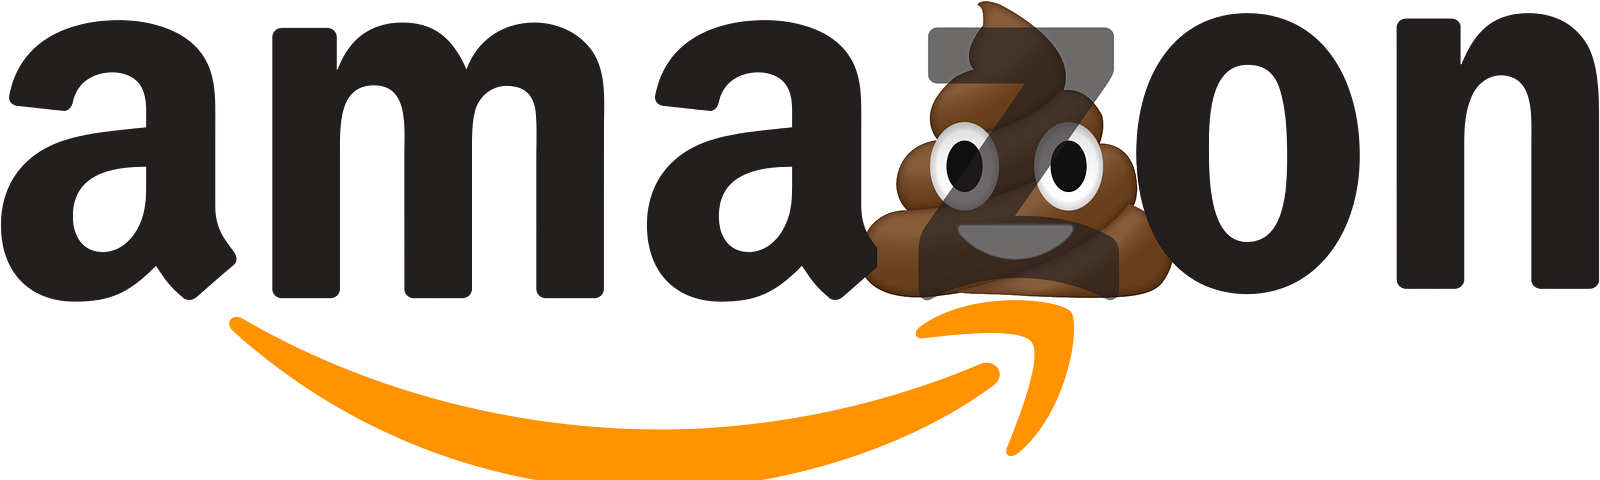 IMAGE: Amazon’s logo with a pile of poop under a semitransparent Z